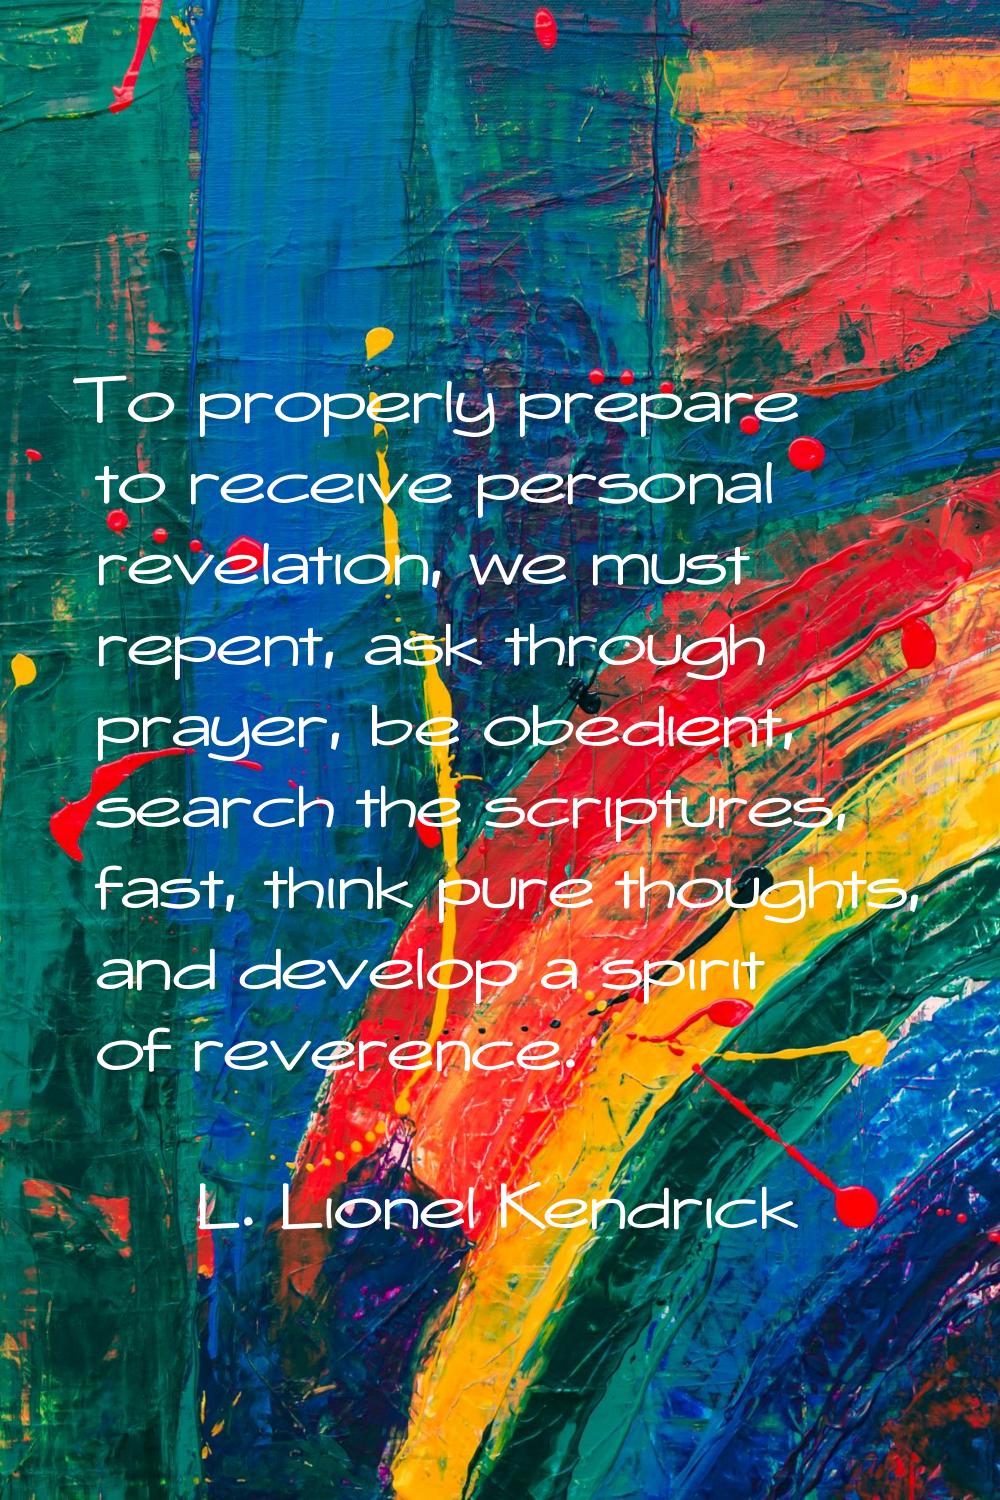 To properly prepare to receive personal revelation, we must repent, ask through prayer, be obedient